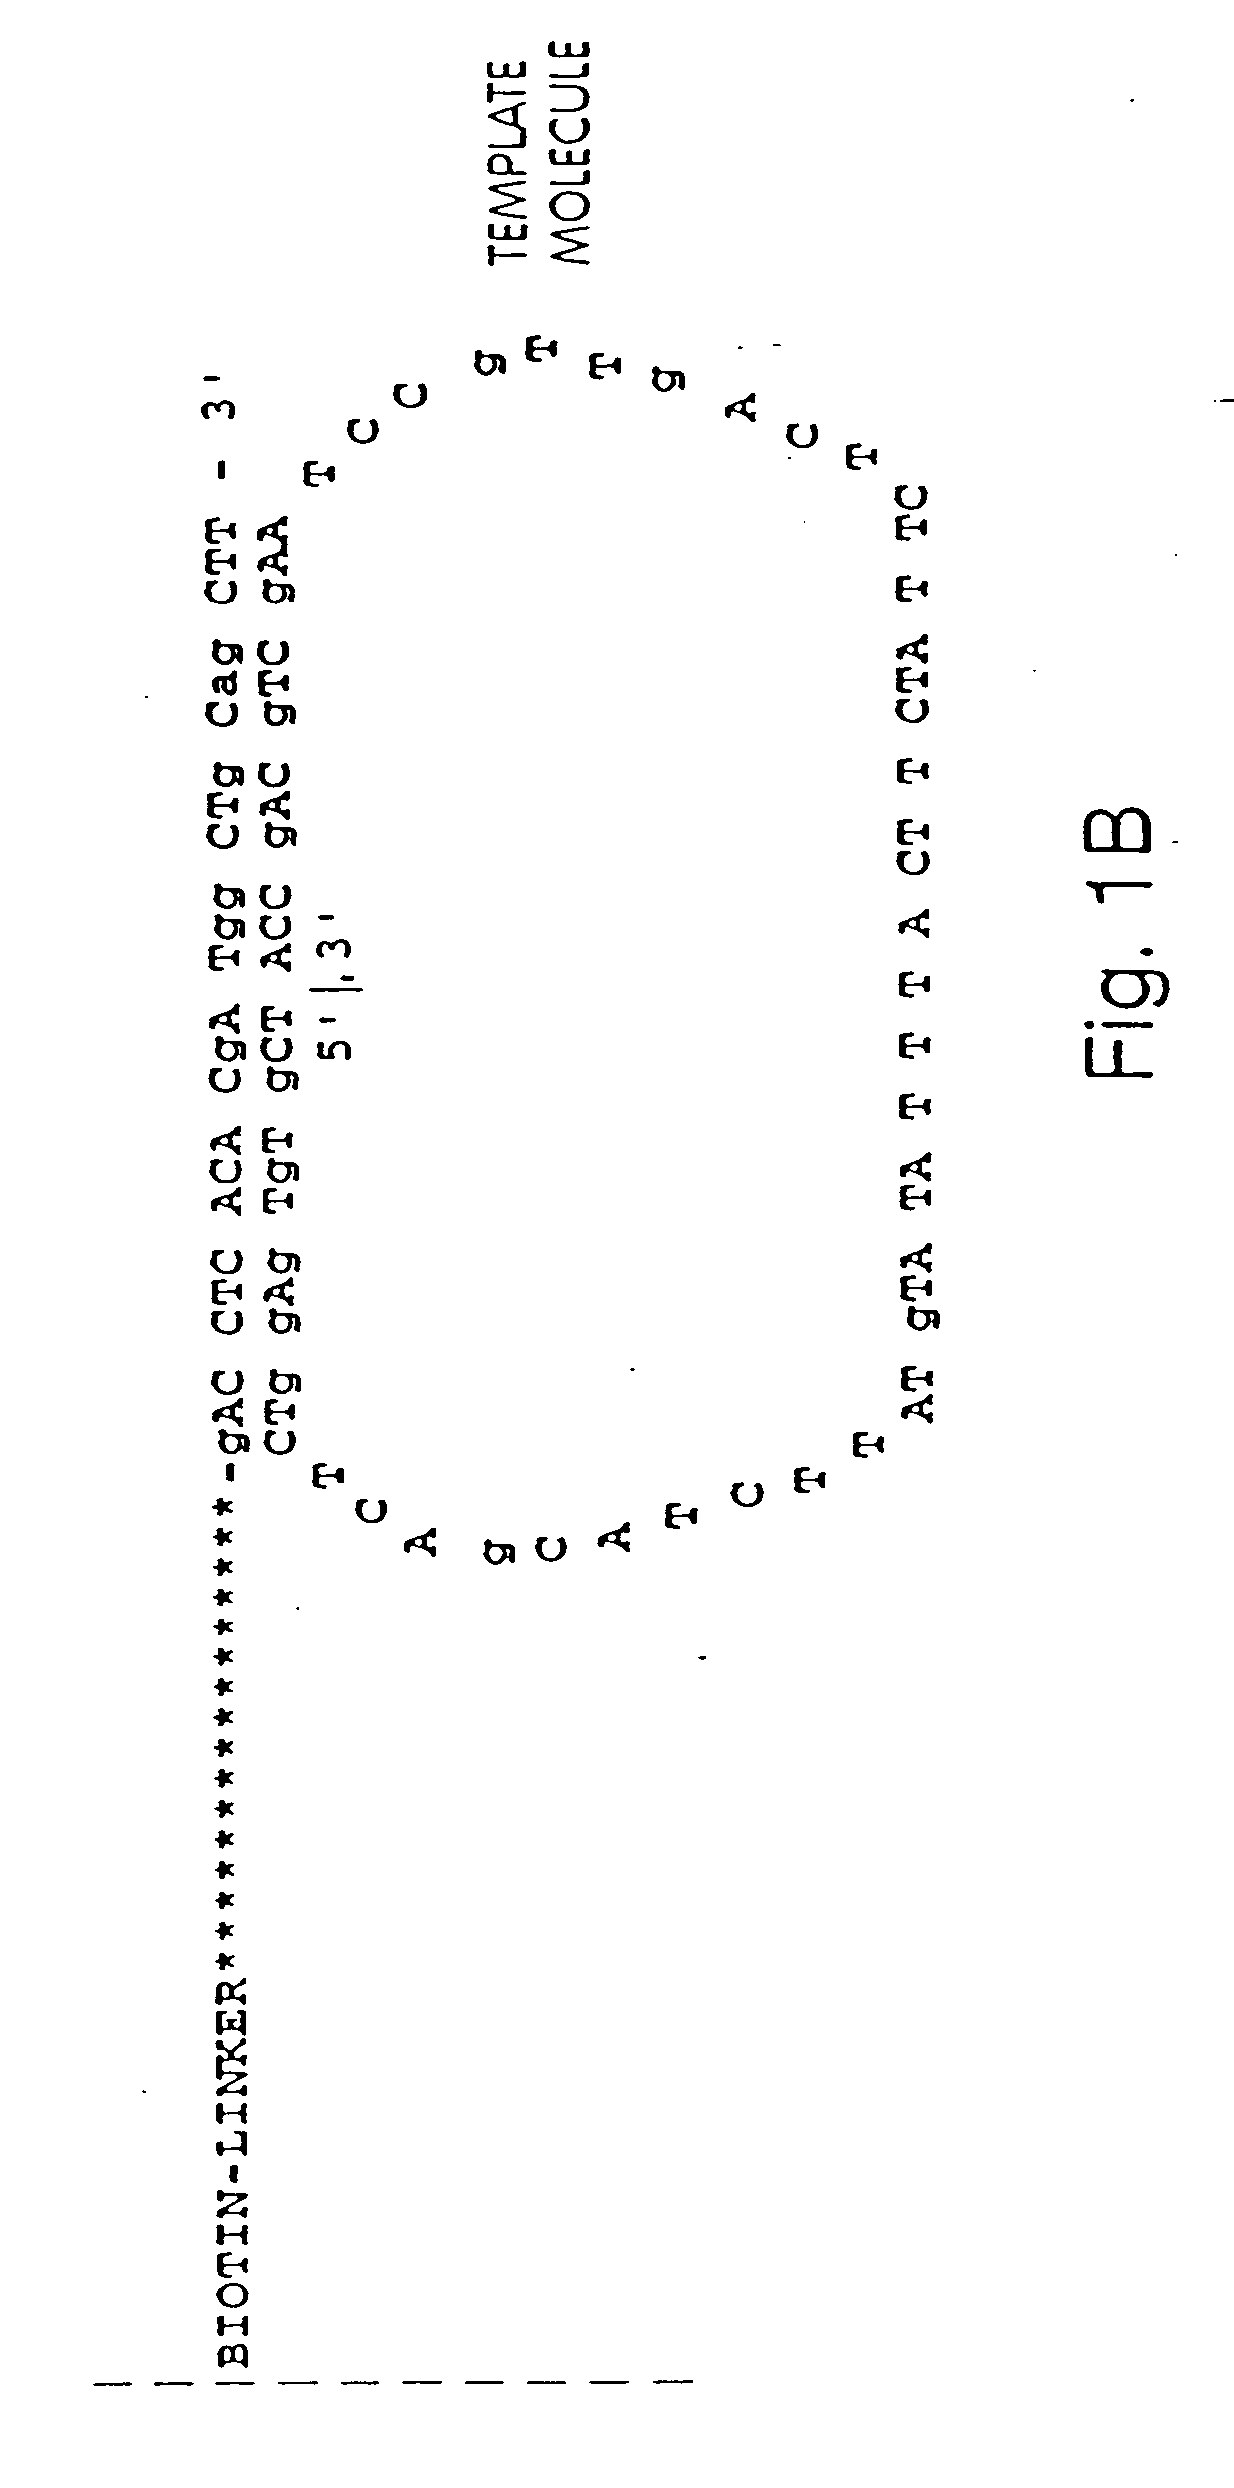 Apparatus and method for sequencing a nucleic acid